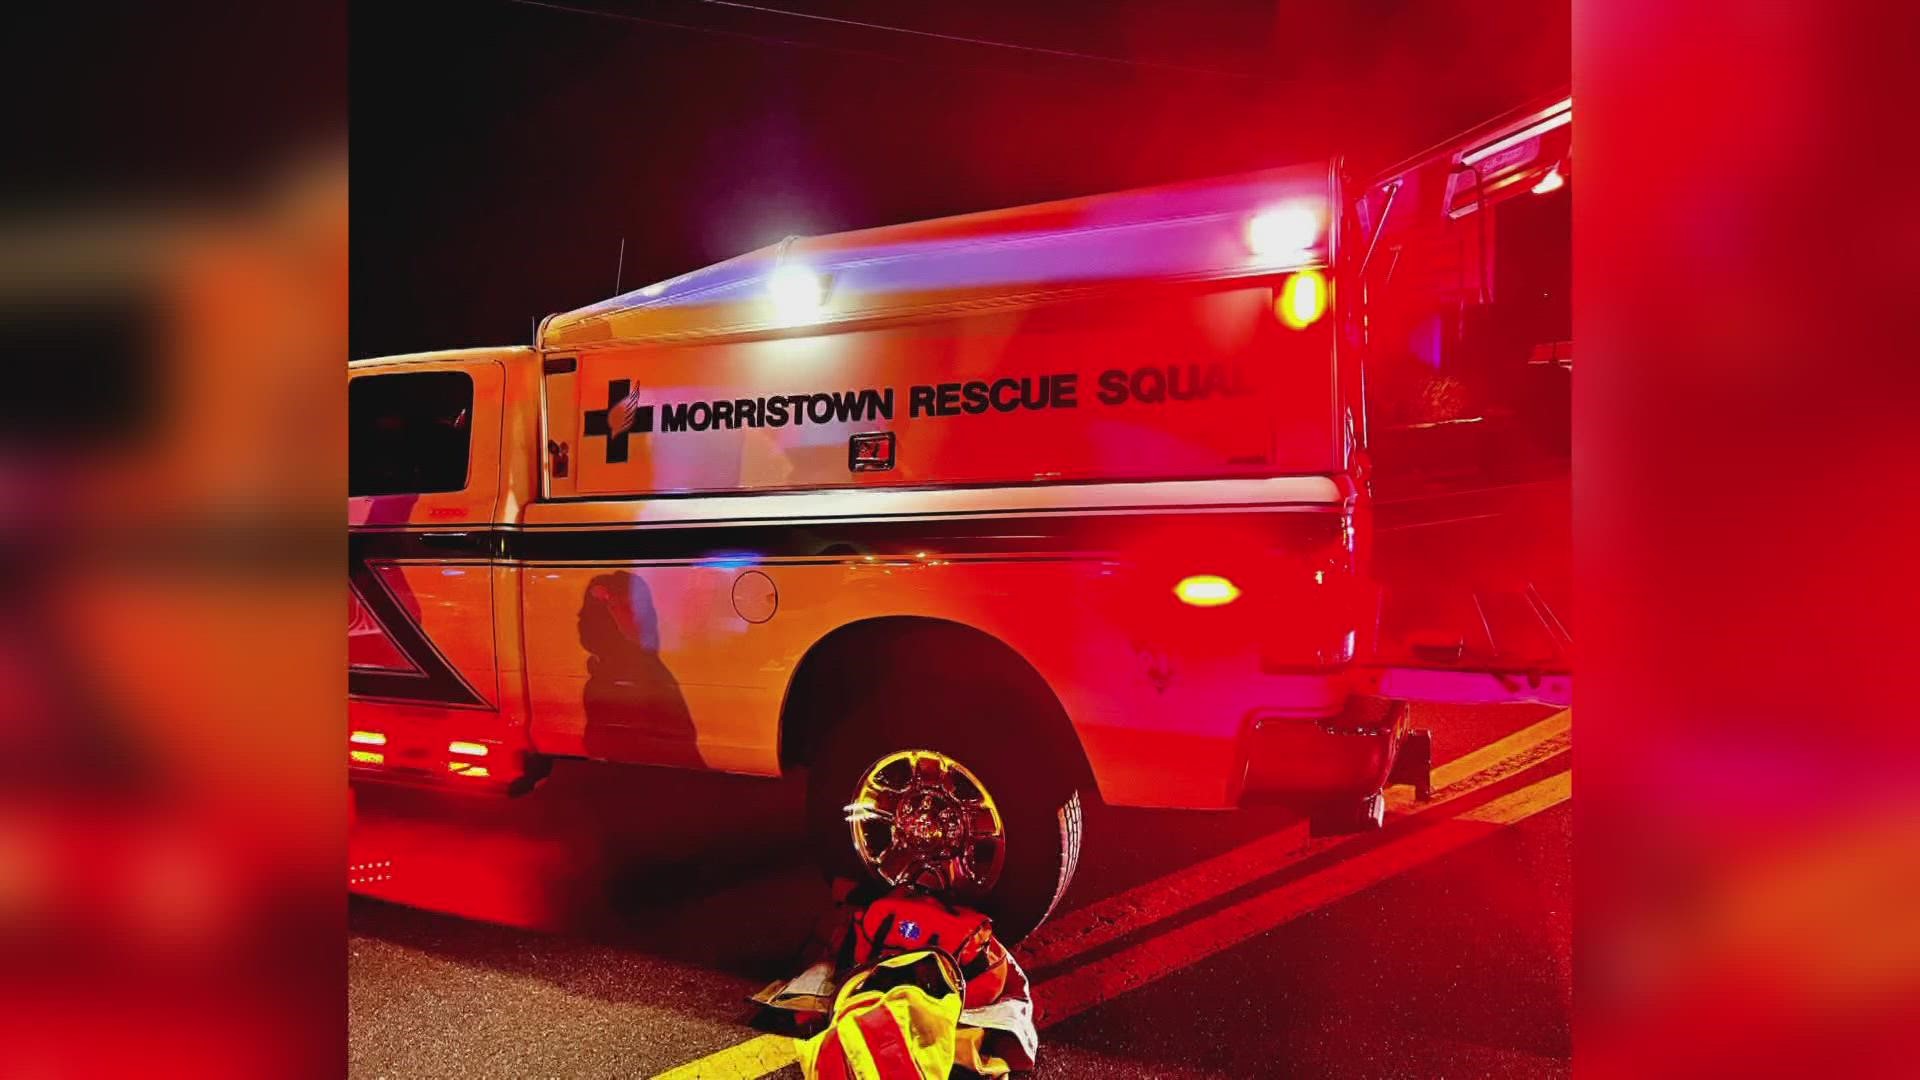 Morristown Emergency and Rescue Squad responded to a crash on Morris Boulevard outside a Waffle House Saturday morning.